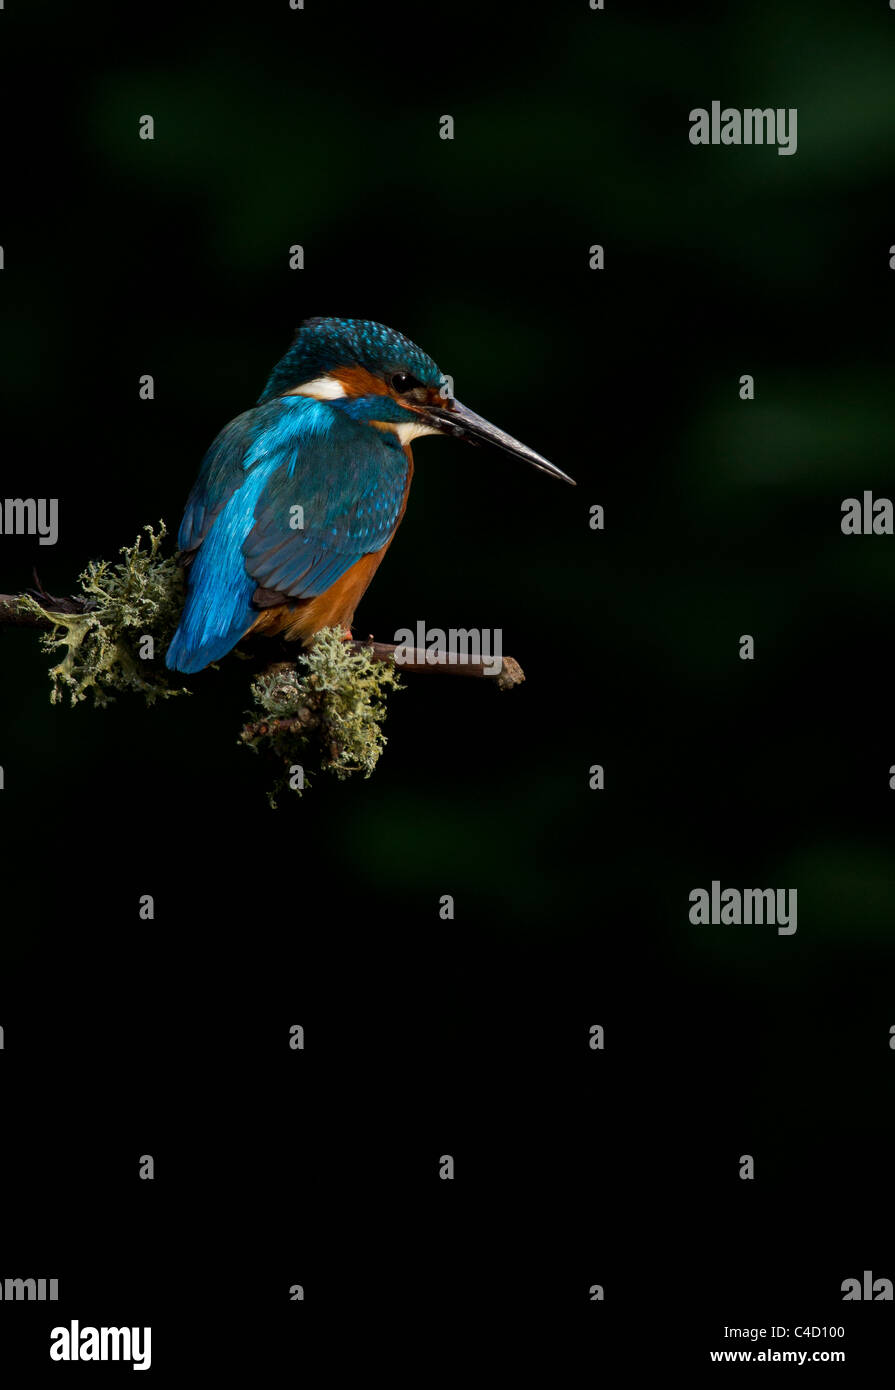 Kingfisher, Alcedo atthis waiting to dive Stock Photo